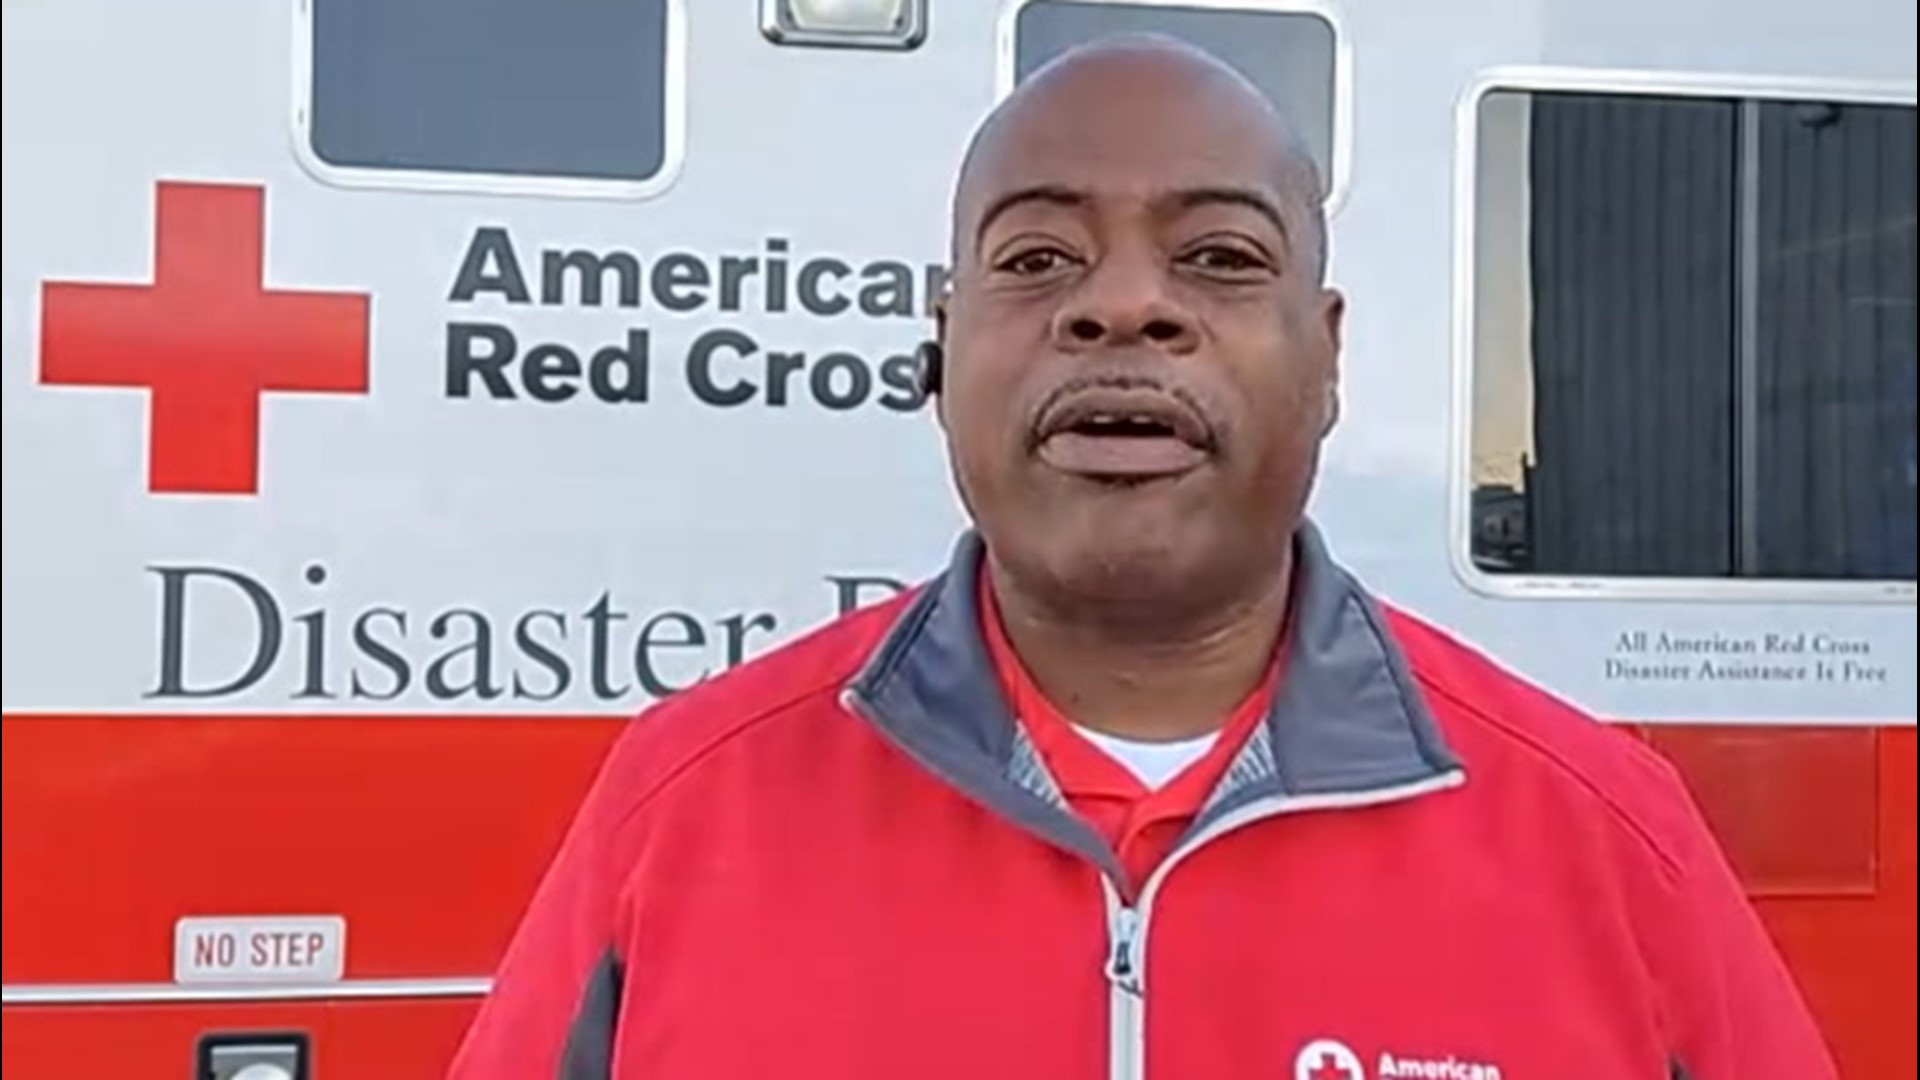 Aside from a busy year, its been a busy decade as the Red Cross has responded to disaster after disaster. We caught up with representatives from the organization.